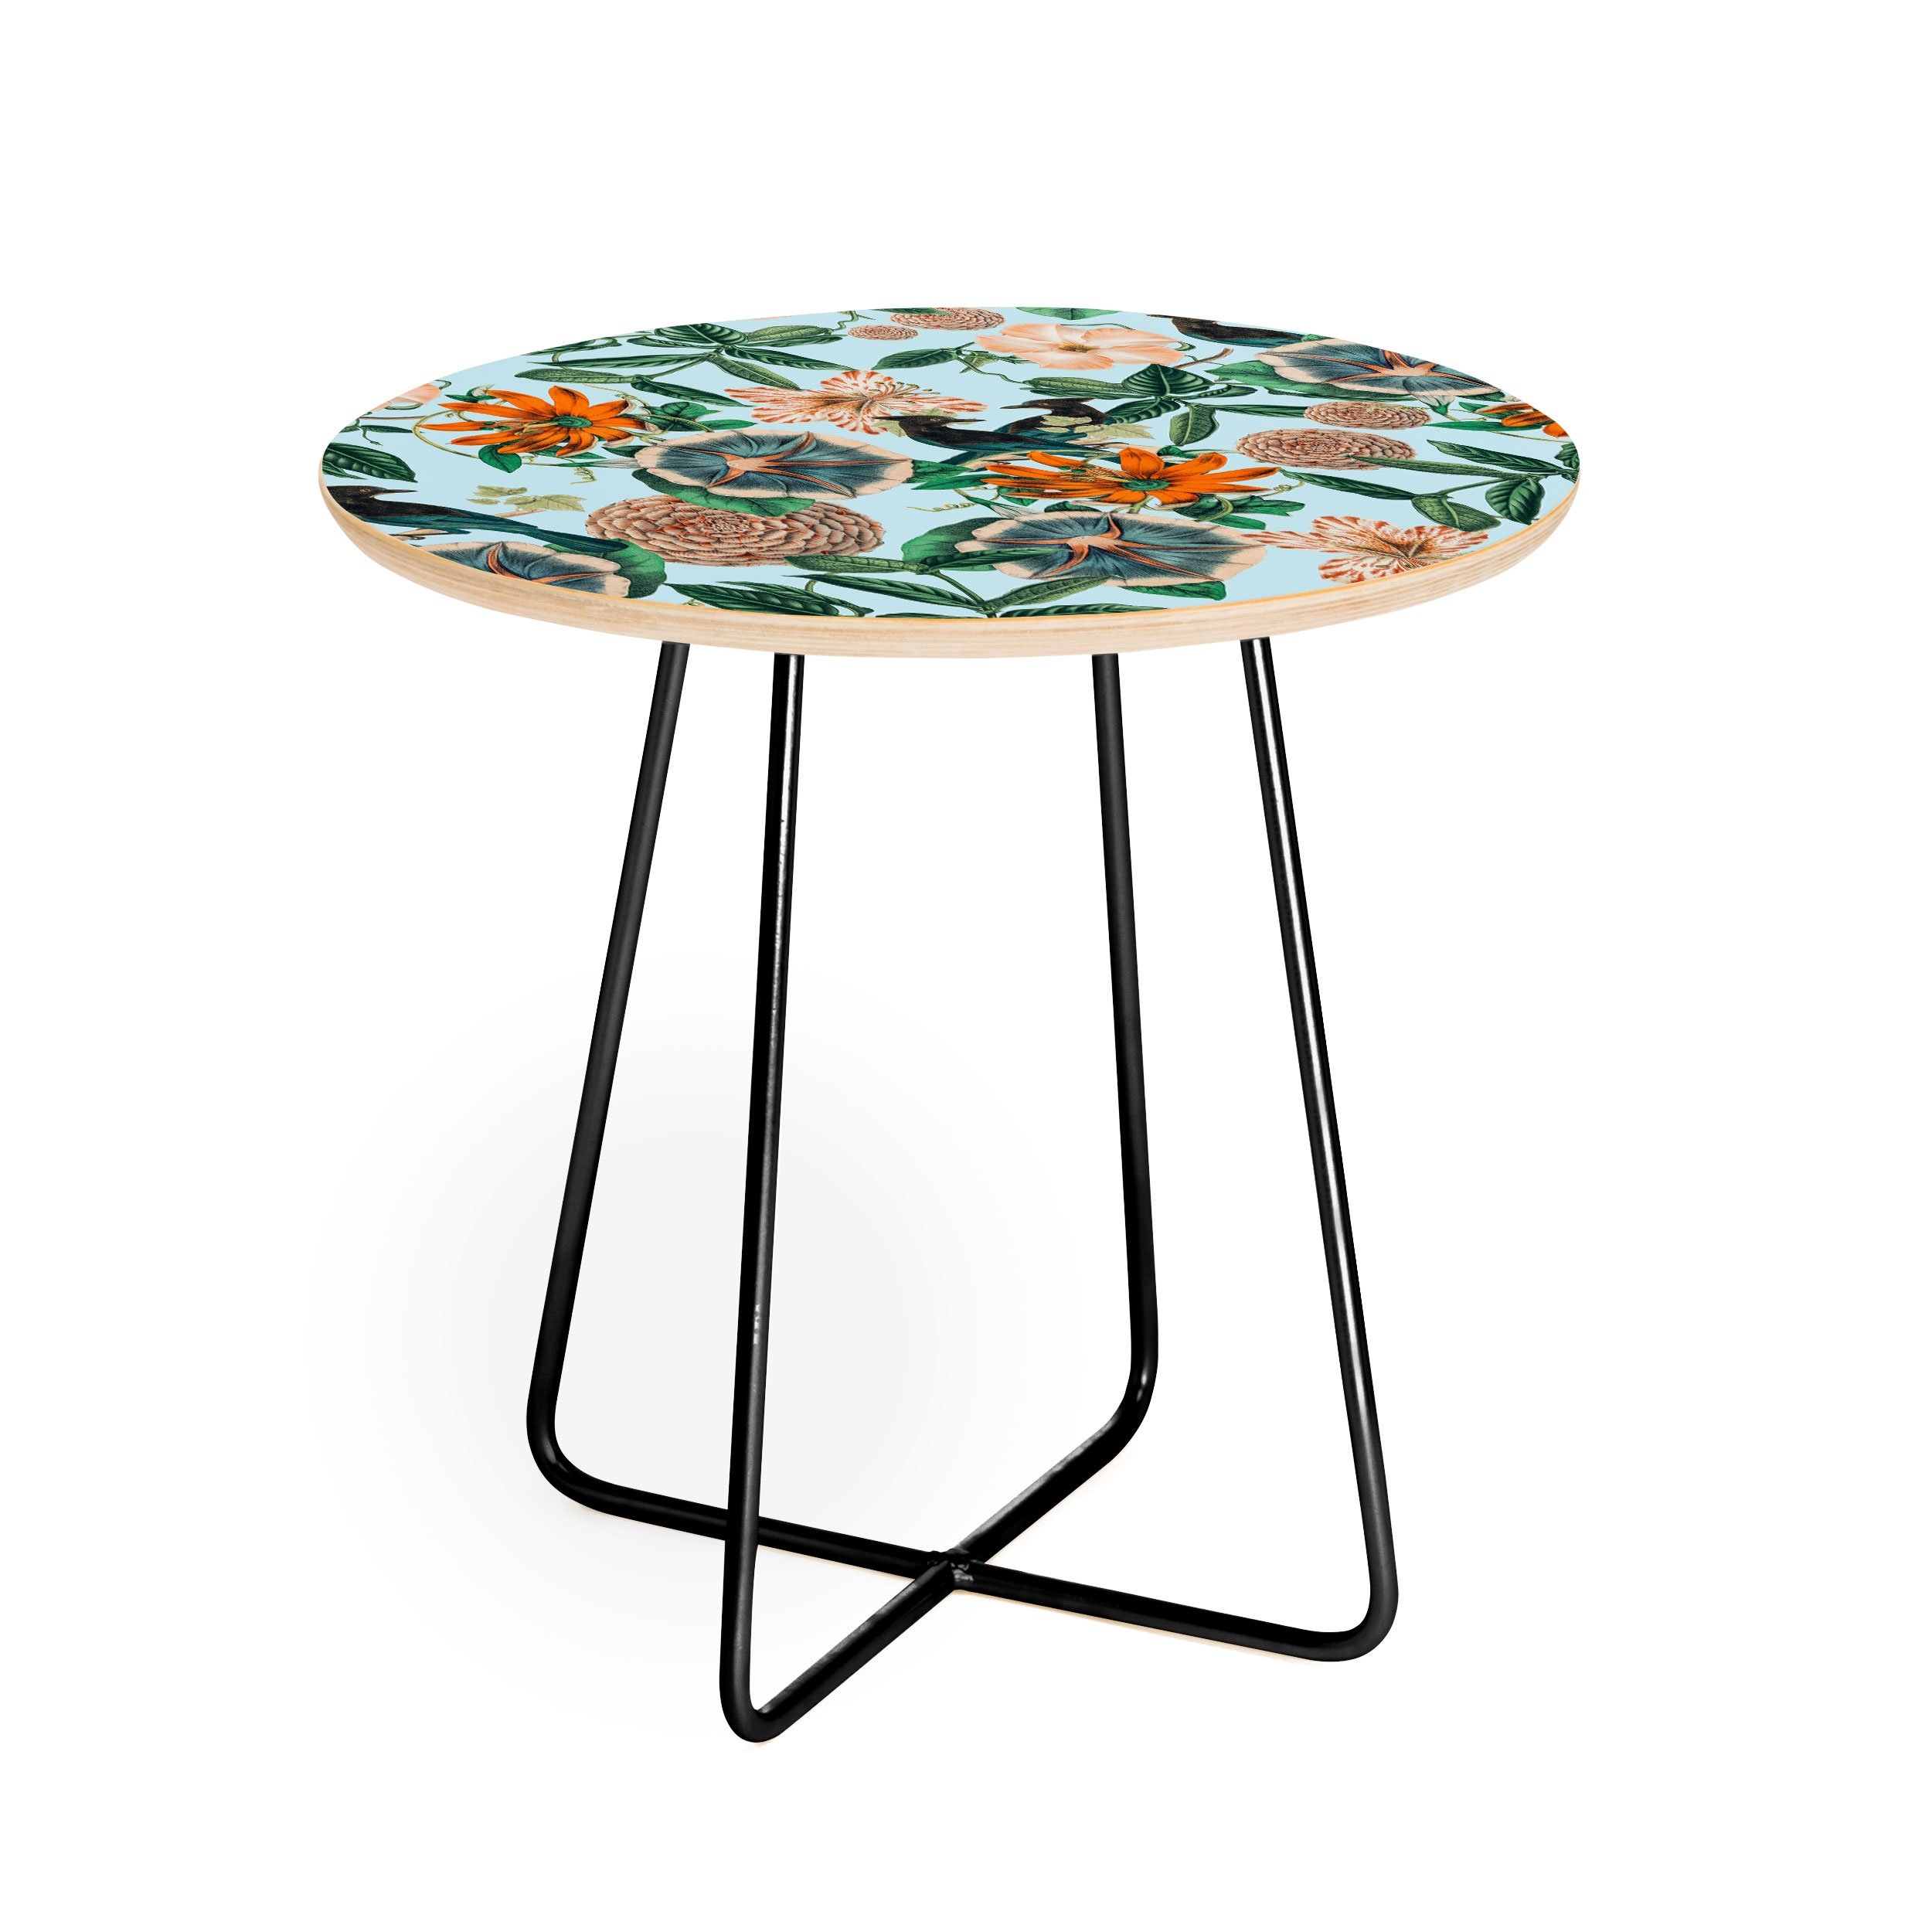 83 Oranges Forest Birds Round Side Table - Gold Aston Legs - Image 1